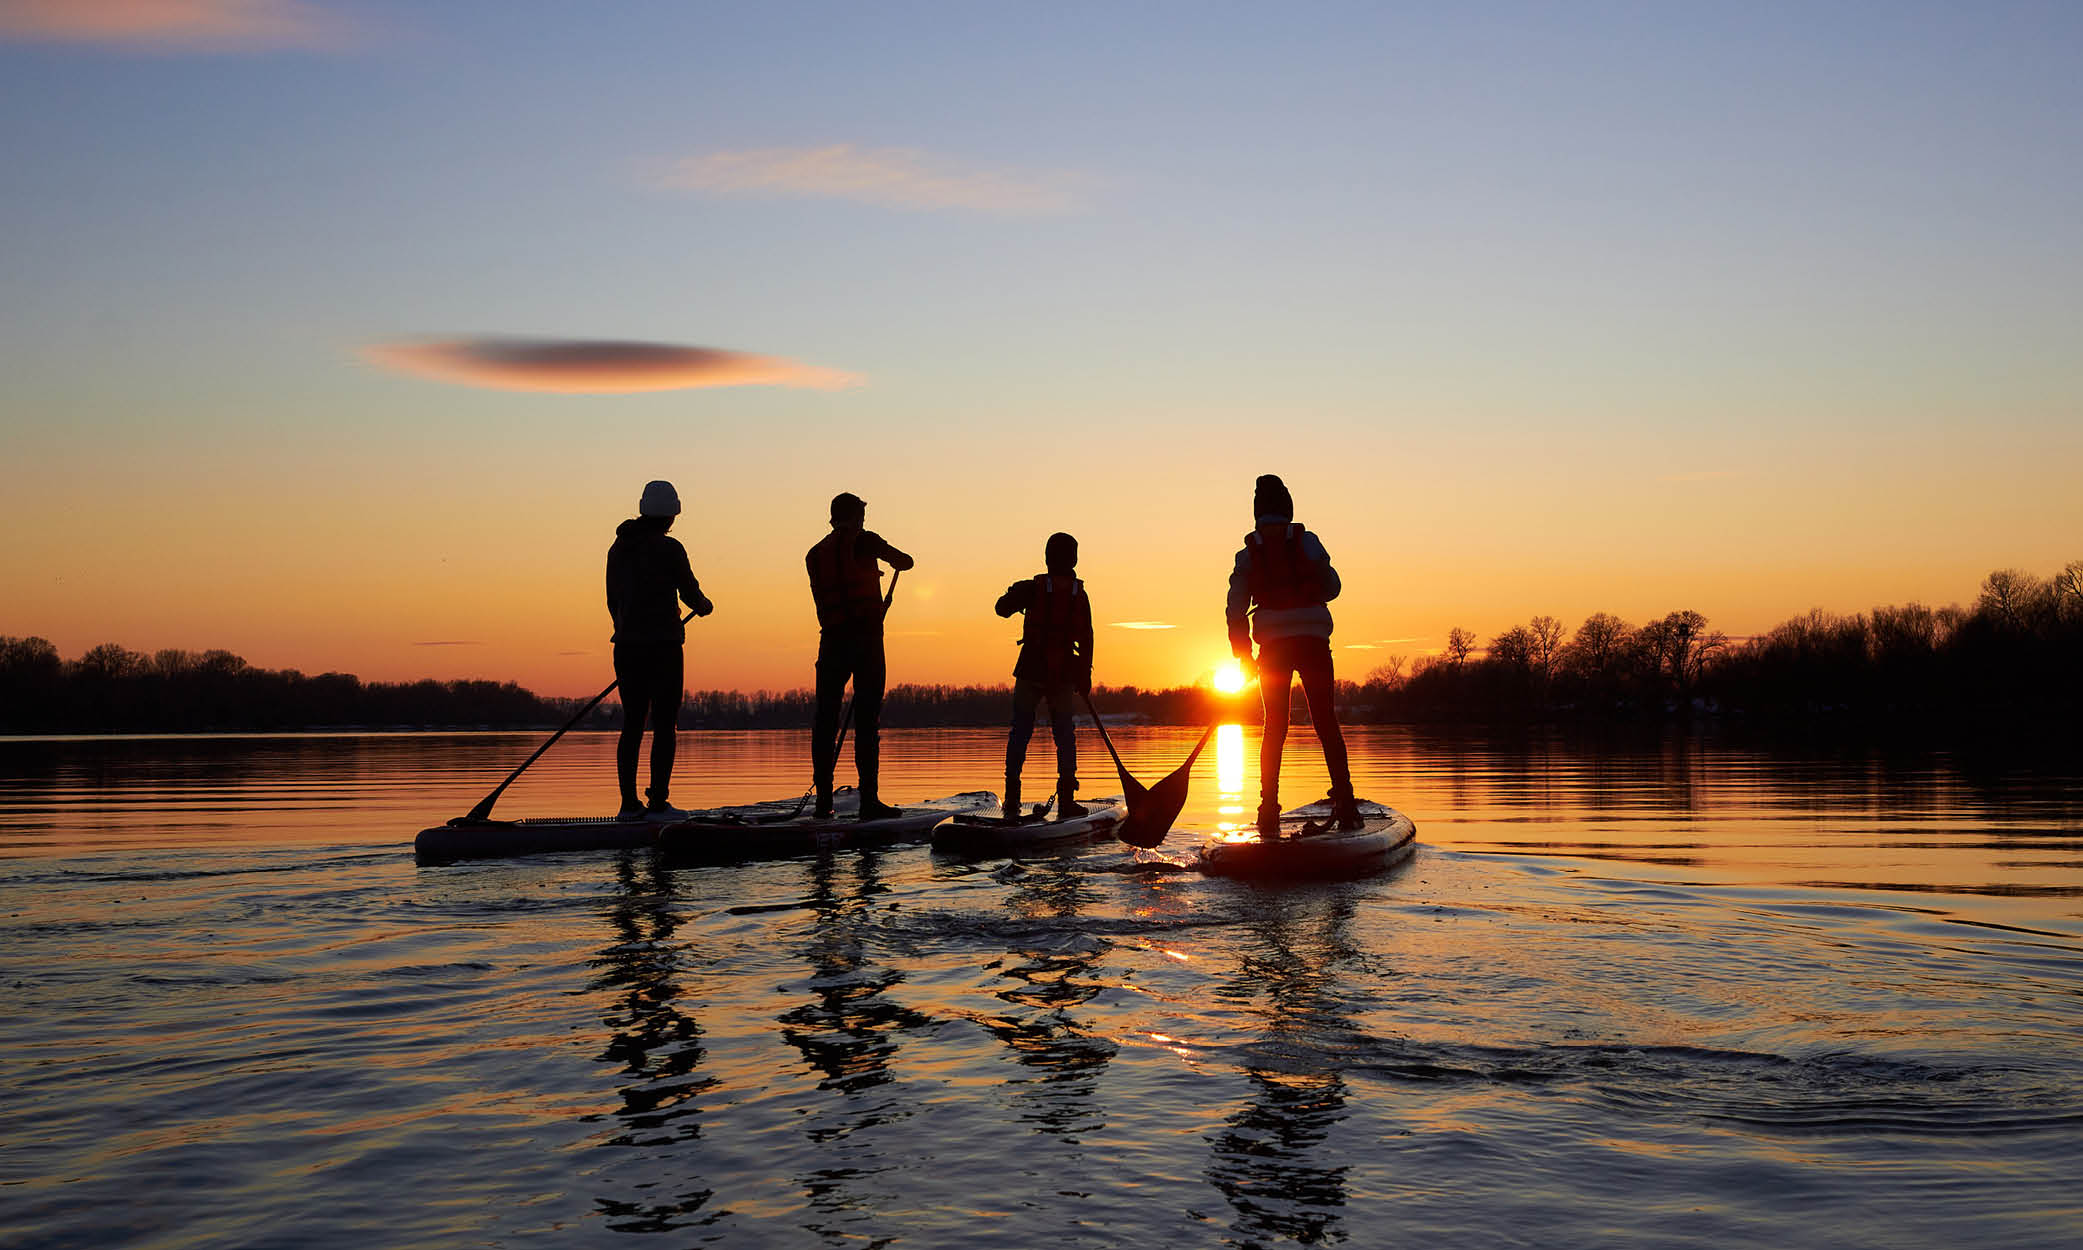 Four people are in a lake standing on a paddle board with a sunset in the background.